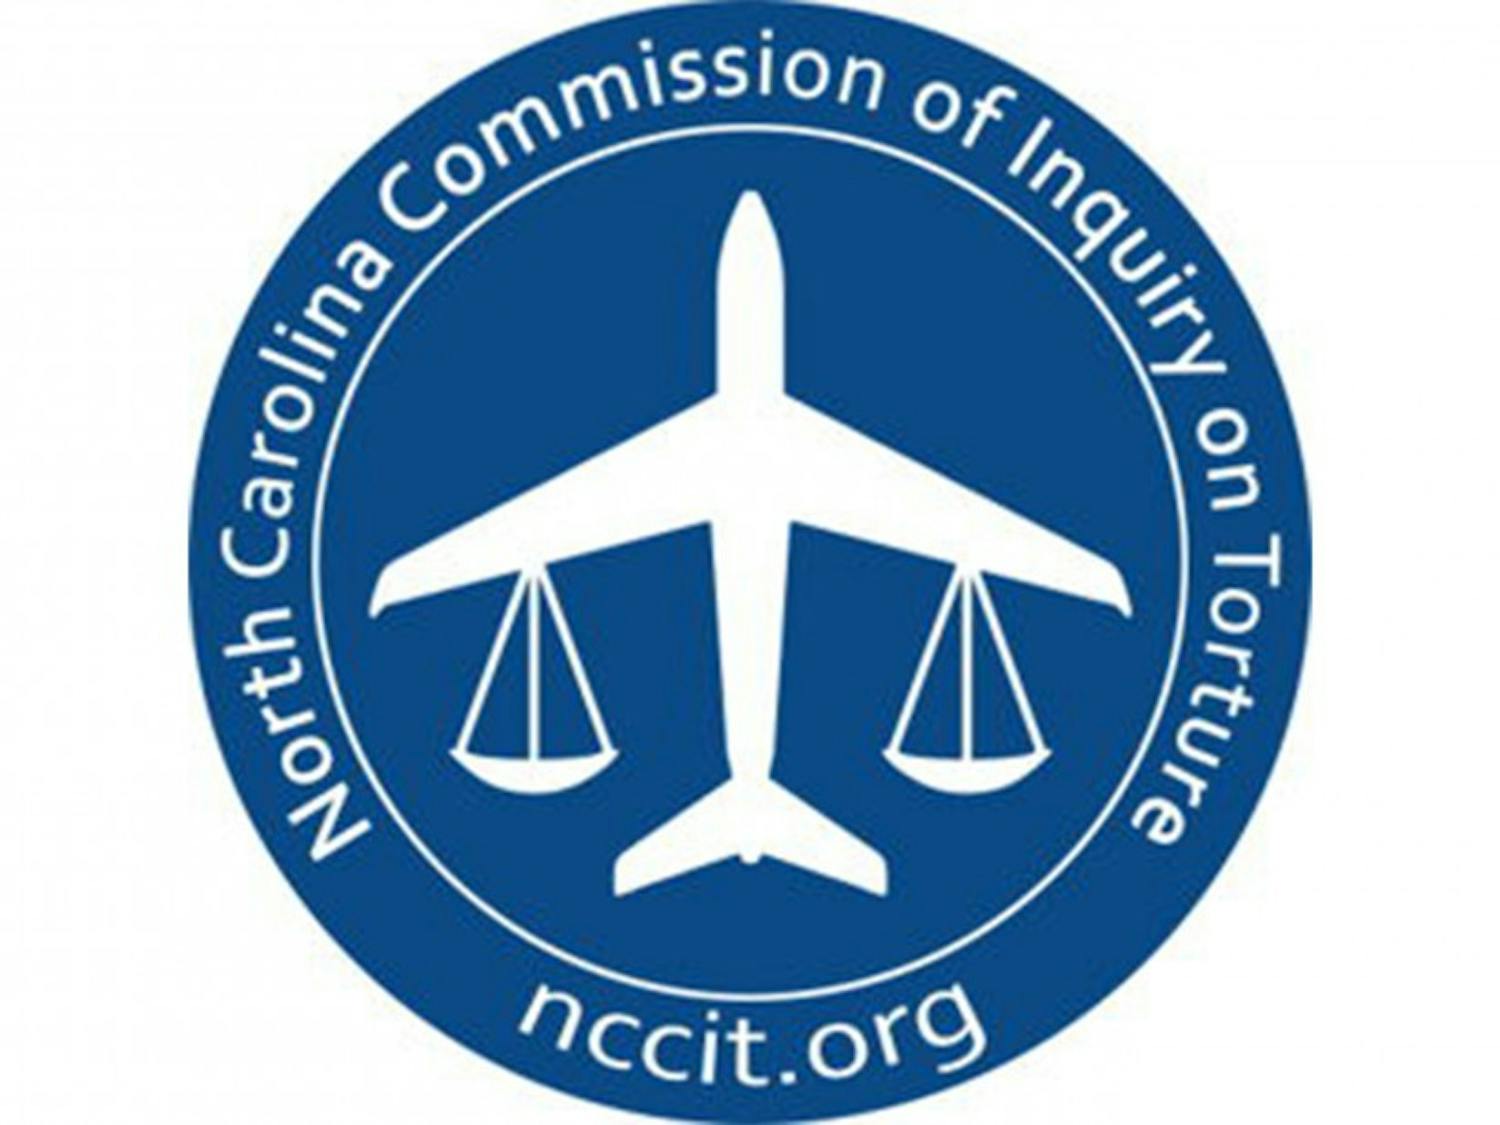 The North Carolina Commission of Inquiry on Torture is examining&nbsp;North Carolina's role in the CIA's "extraordinary rendition" program.